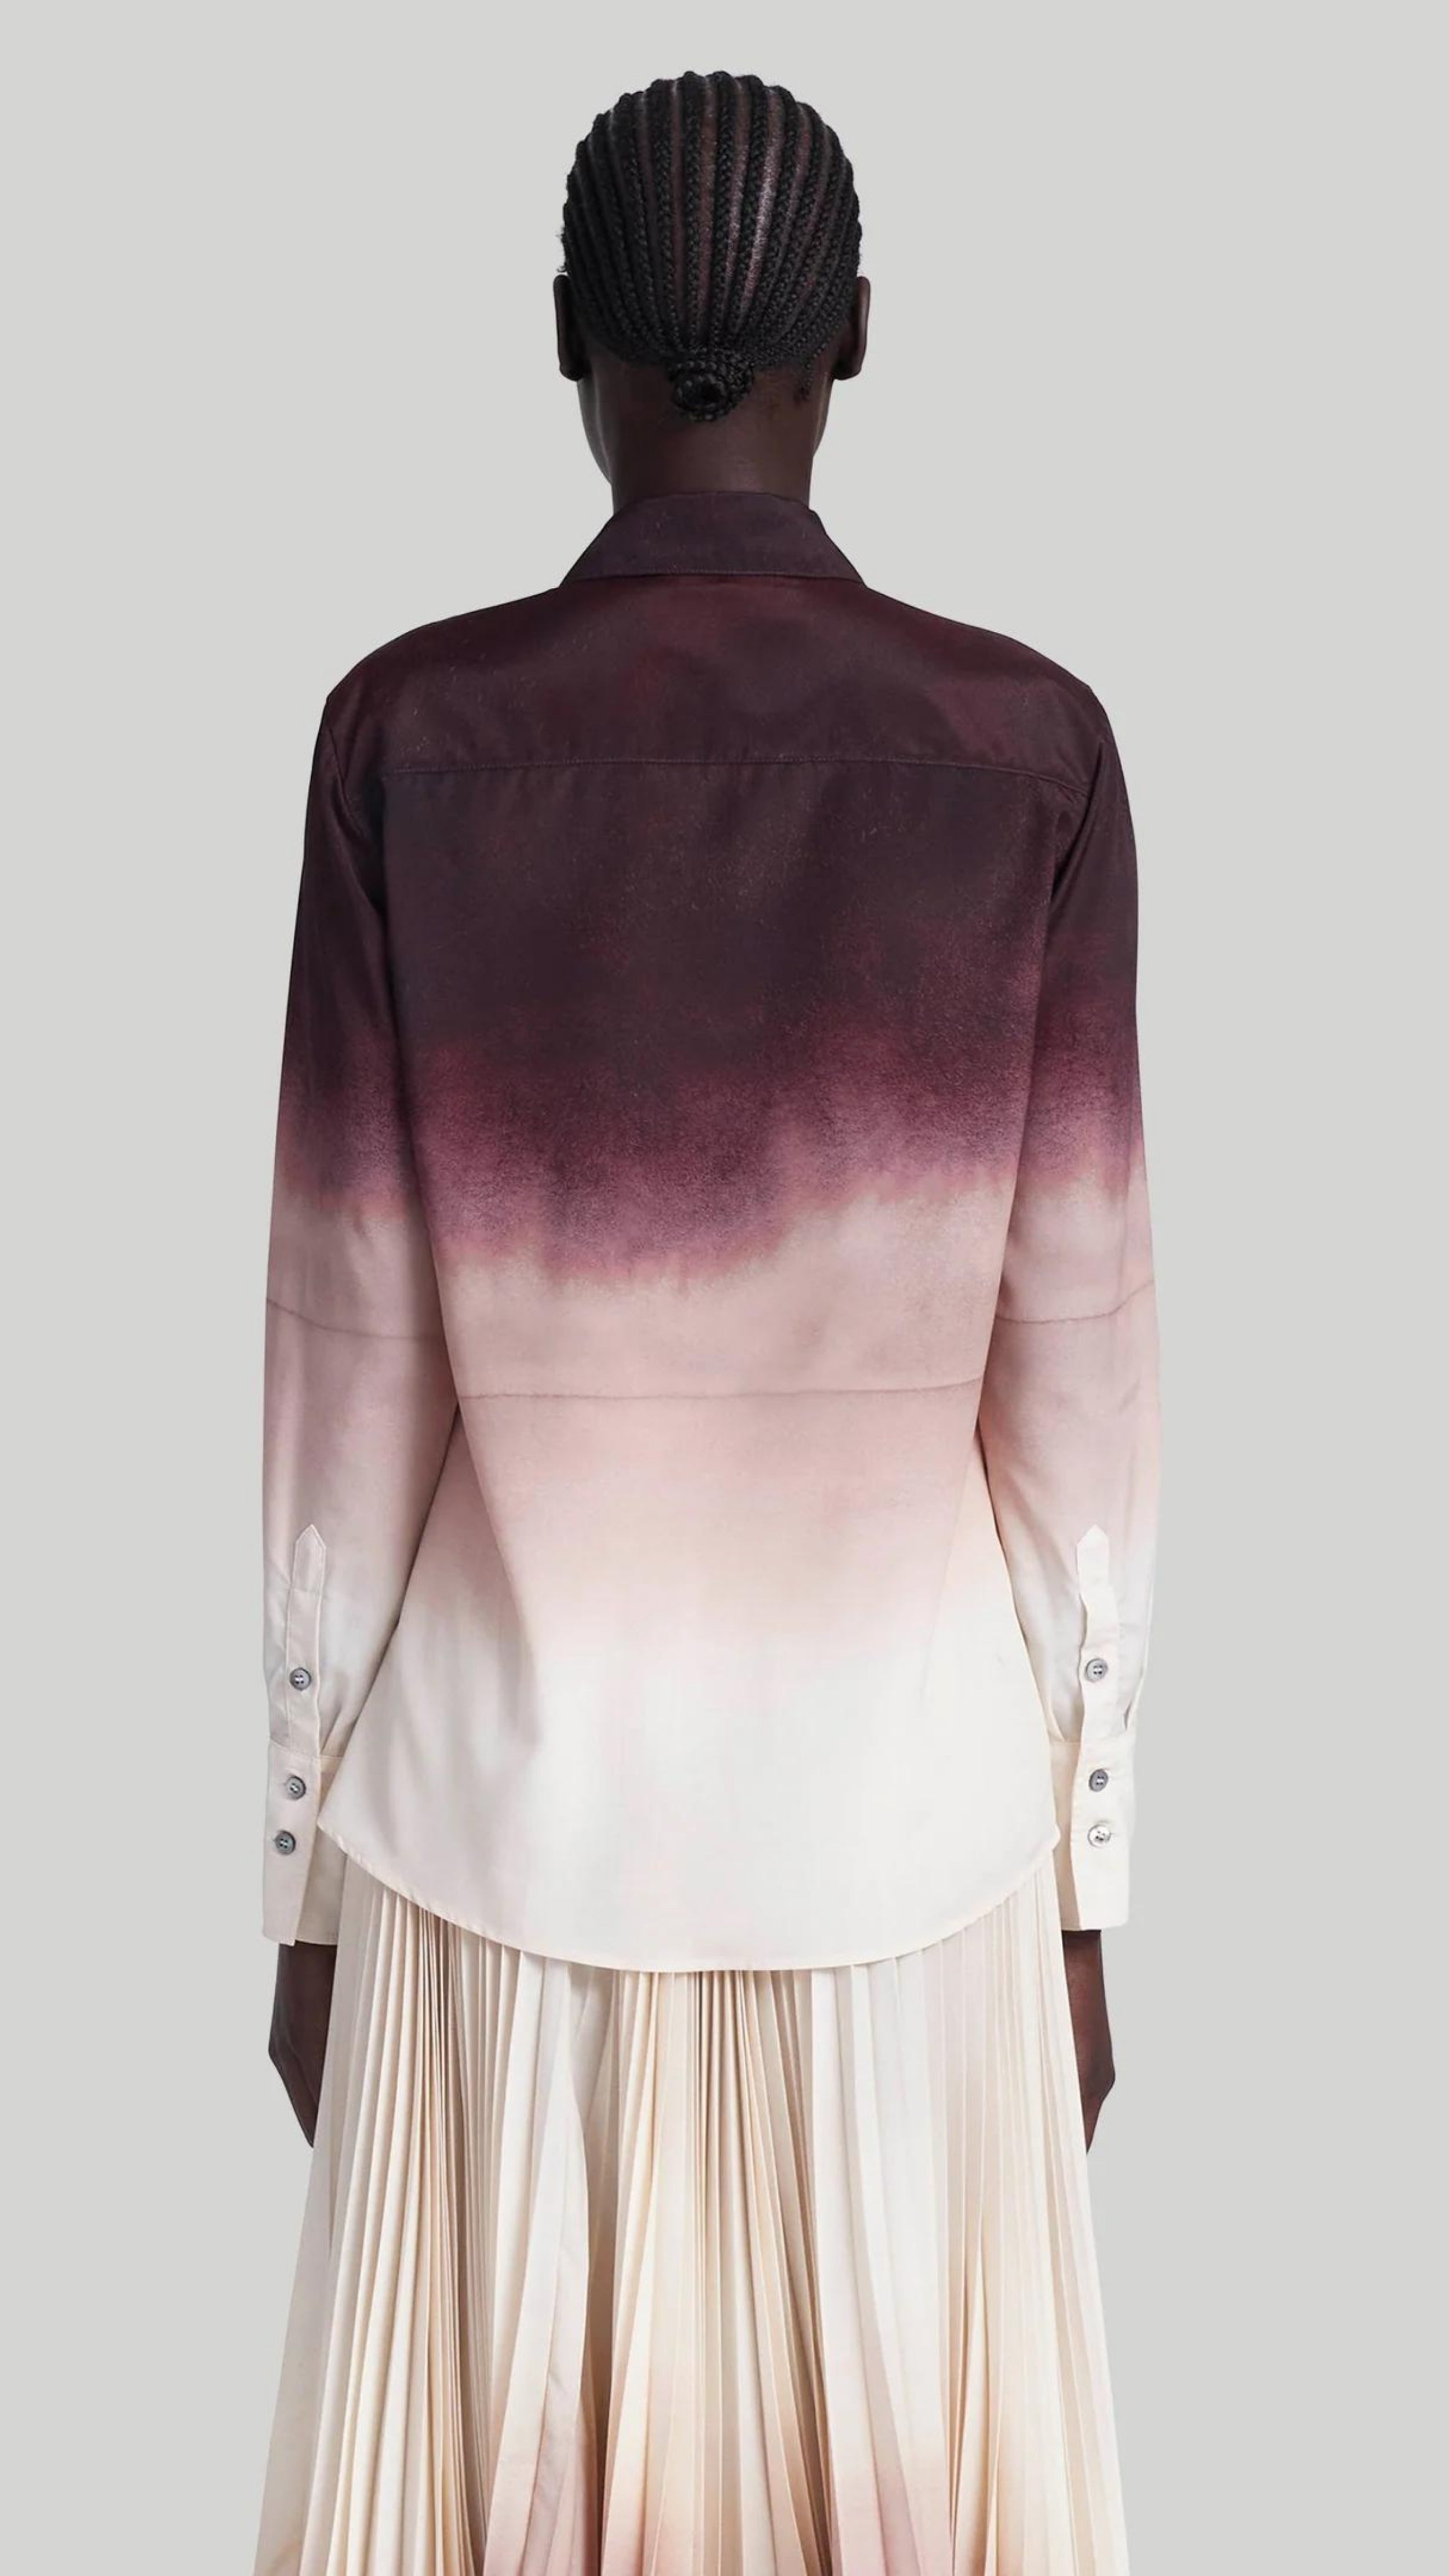 Altuzarra The Chika Top is crafted from Italian silk in an elegant cranberry to ivory dip dye ombre. The classic style button down shirt features a small point collar, concealed button front closure, and long cuffed sleeves. Shown on model facing Back.